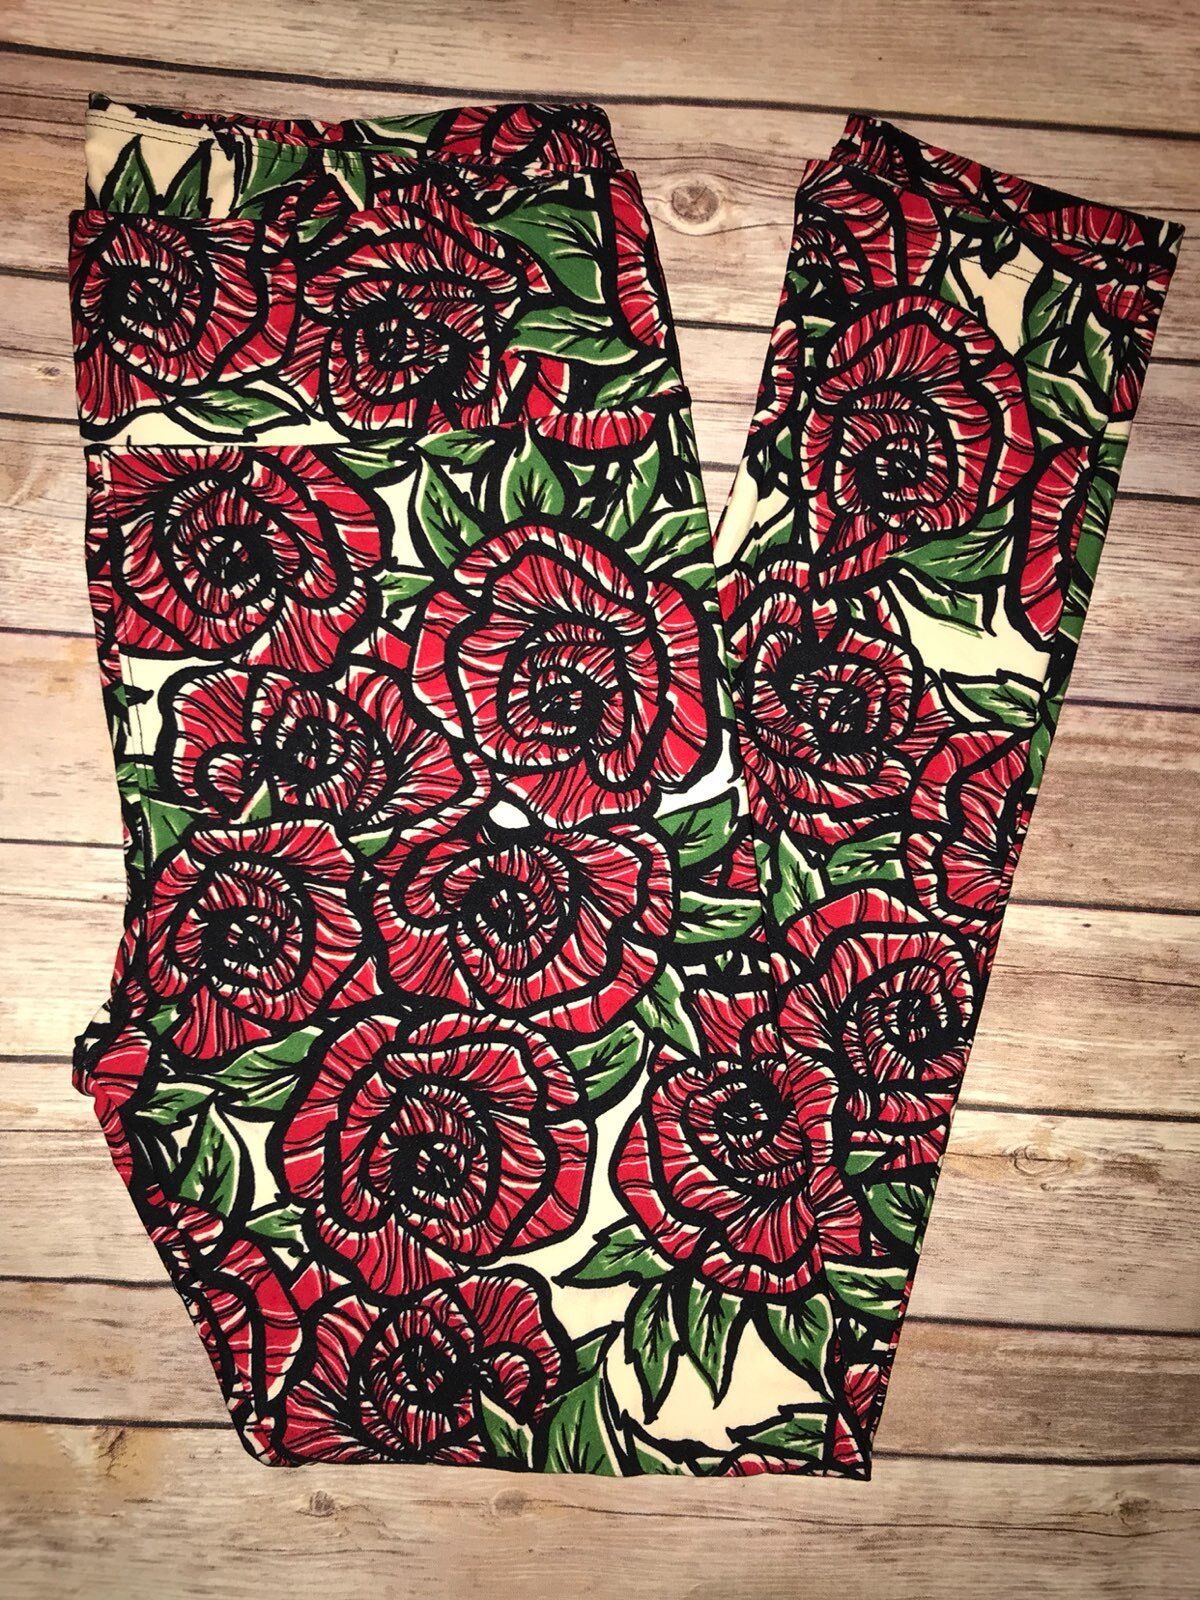 Brand New Lularoe Don't miss the campaign TC Stained Glass Roses Floral Disney depot Red Rose